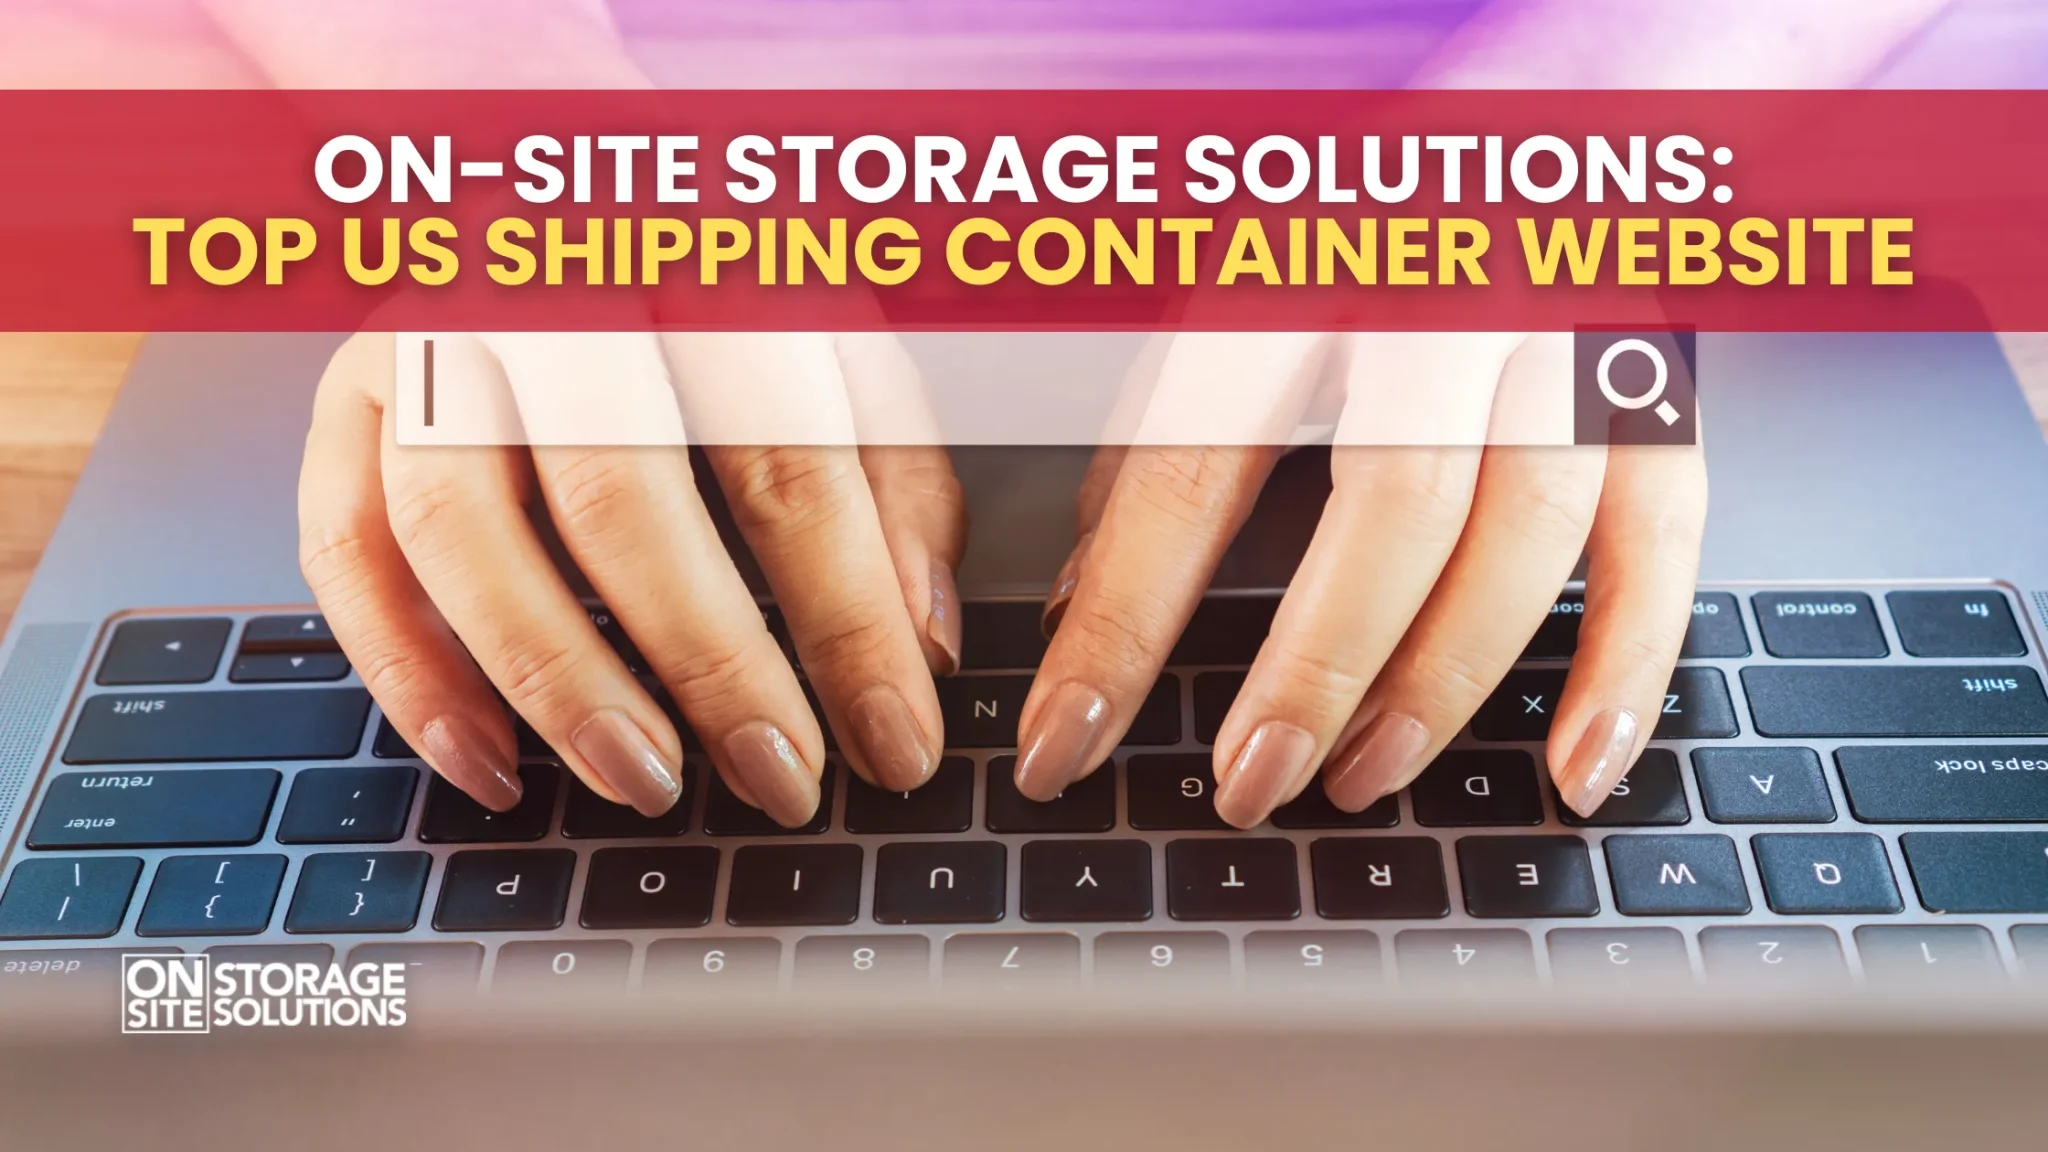 On-Site Storage Solutions: Top US Shipping Container Website